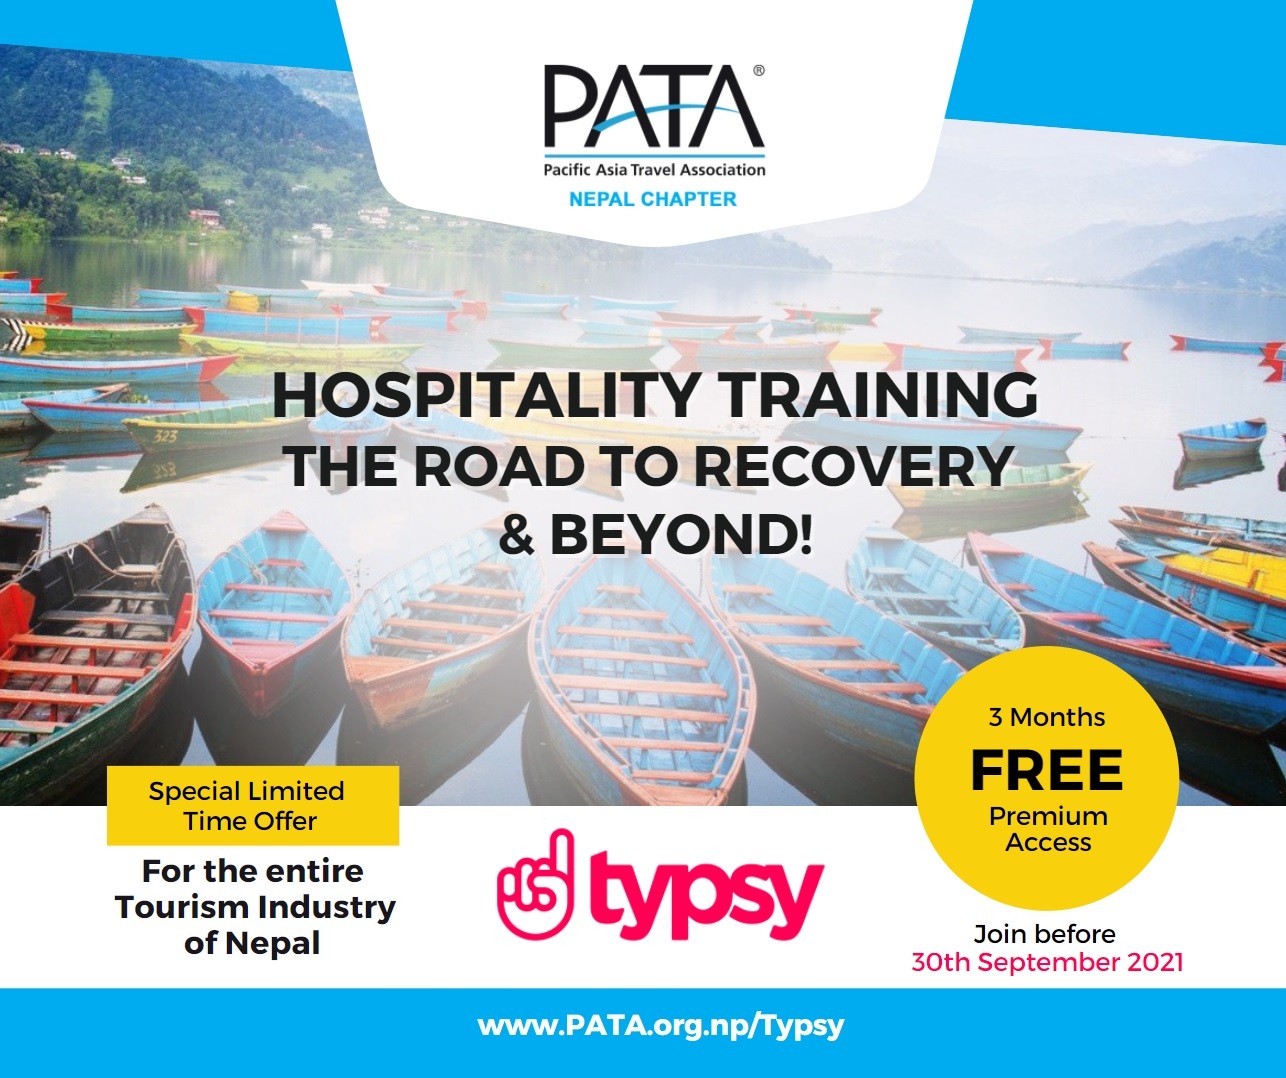 PATA Nepal and Typsy launch "Hospitality Training - The Road to Recovery and Beyond" for Nepal's Tourism Sector